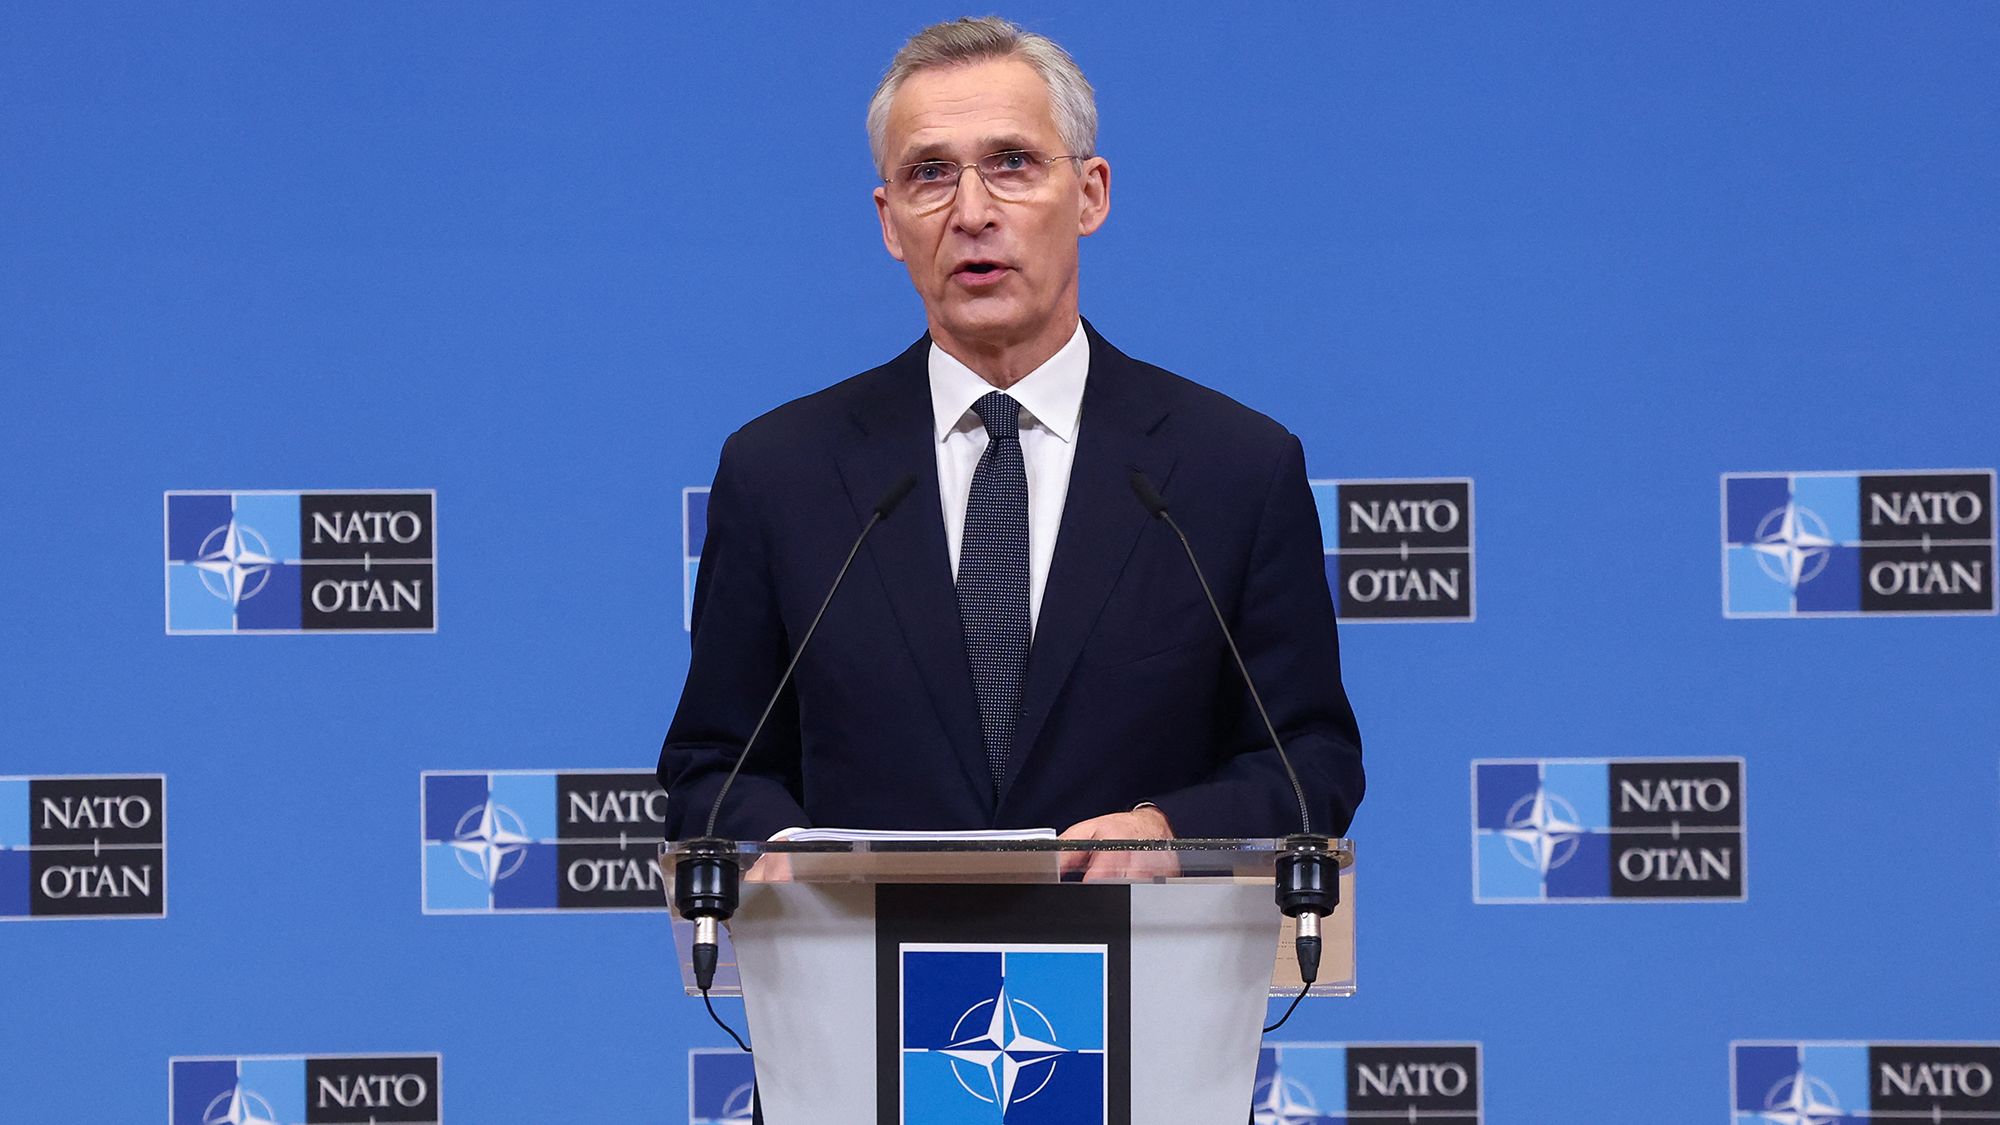 NATO Secretary-General Jens Stoltenberg is seen at a news conference on Wednesday ahead of the NATO Defense Ministers' meeting at the Alliance's headquarters in Brussels, Belgium.